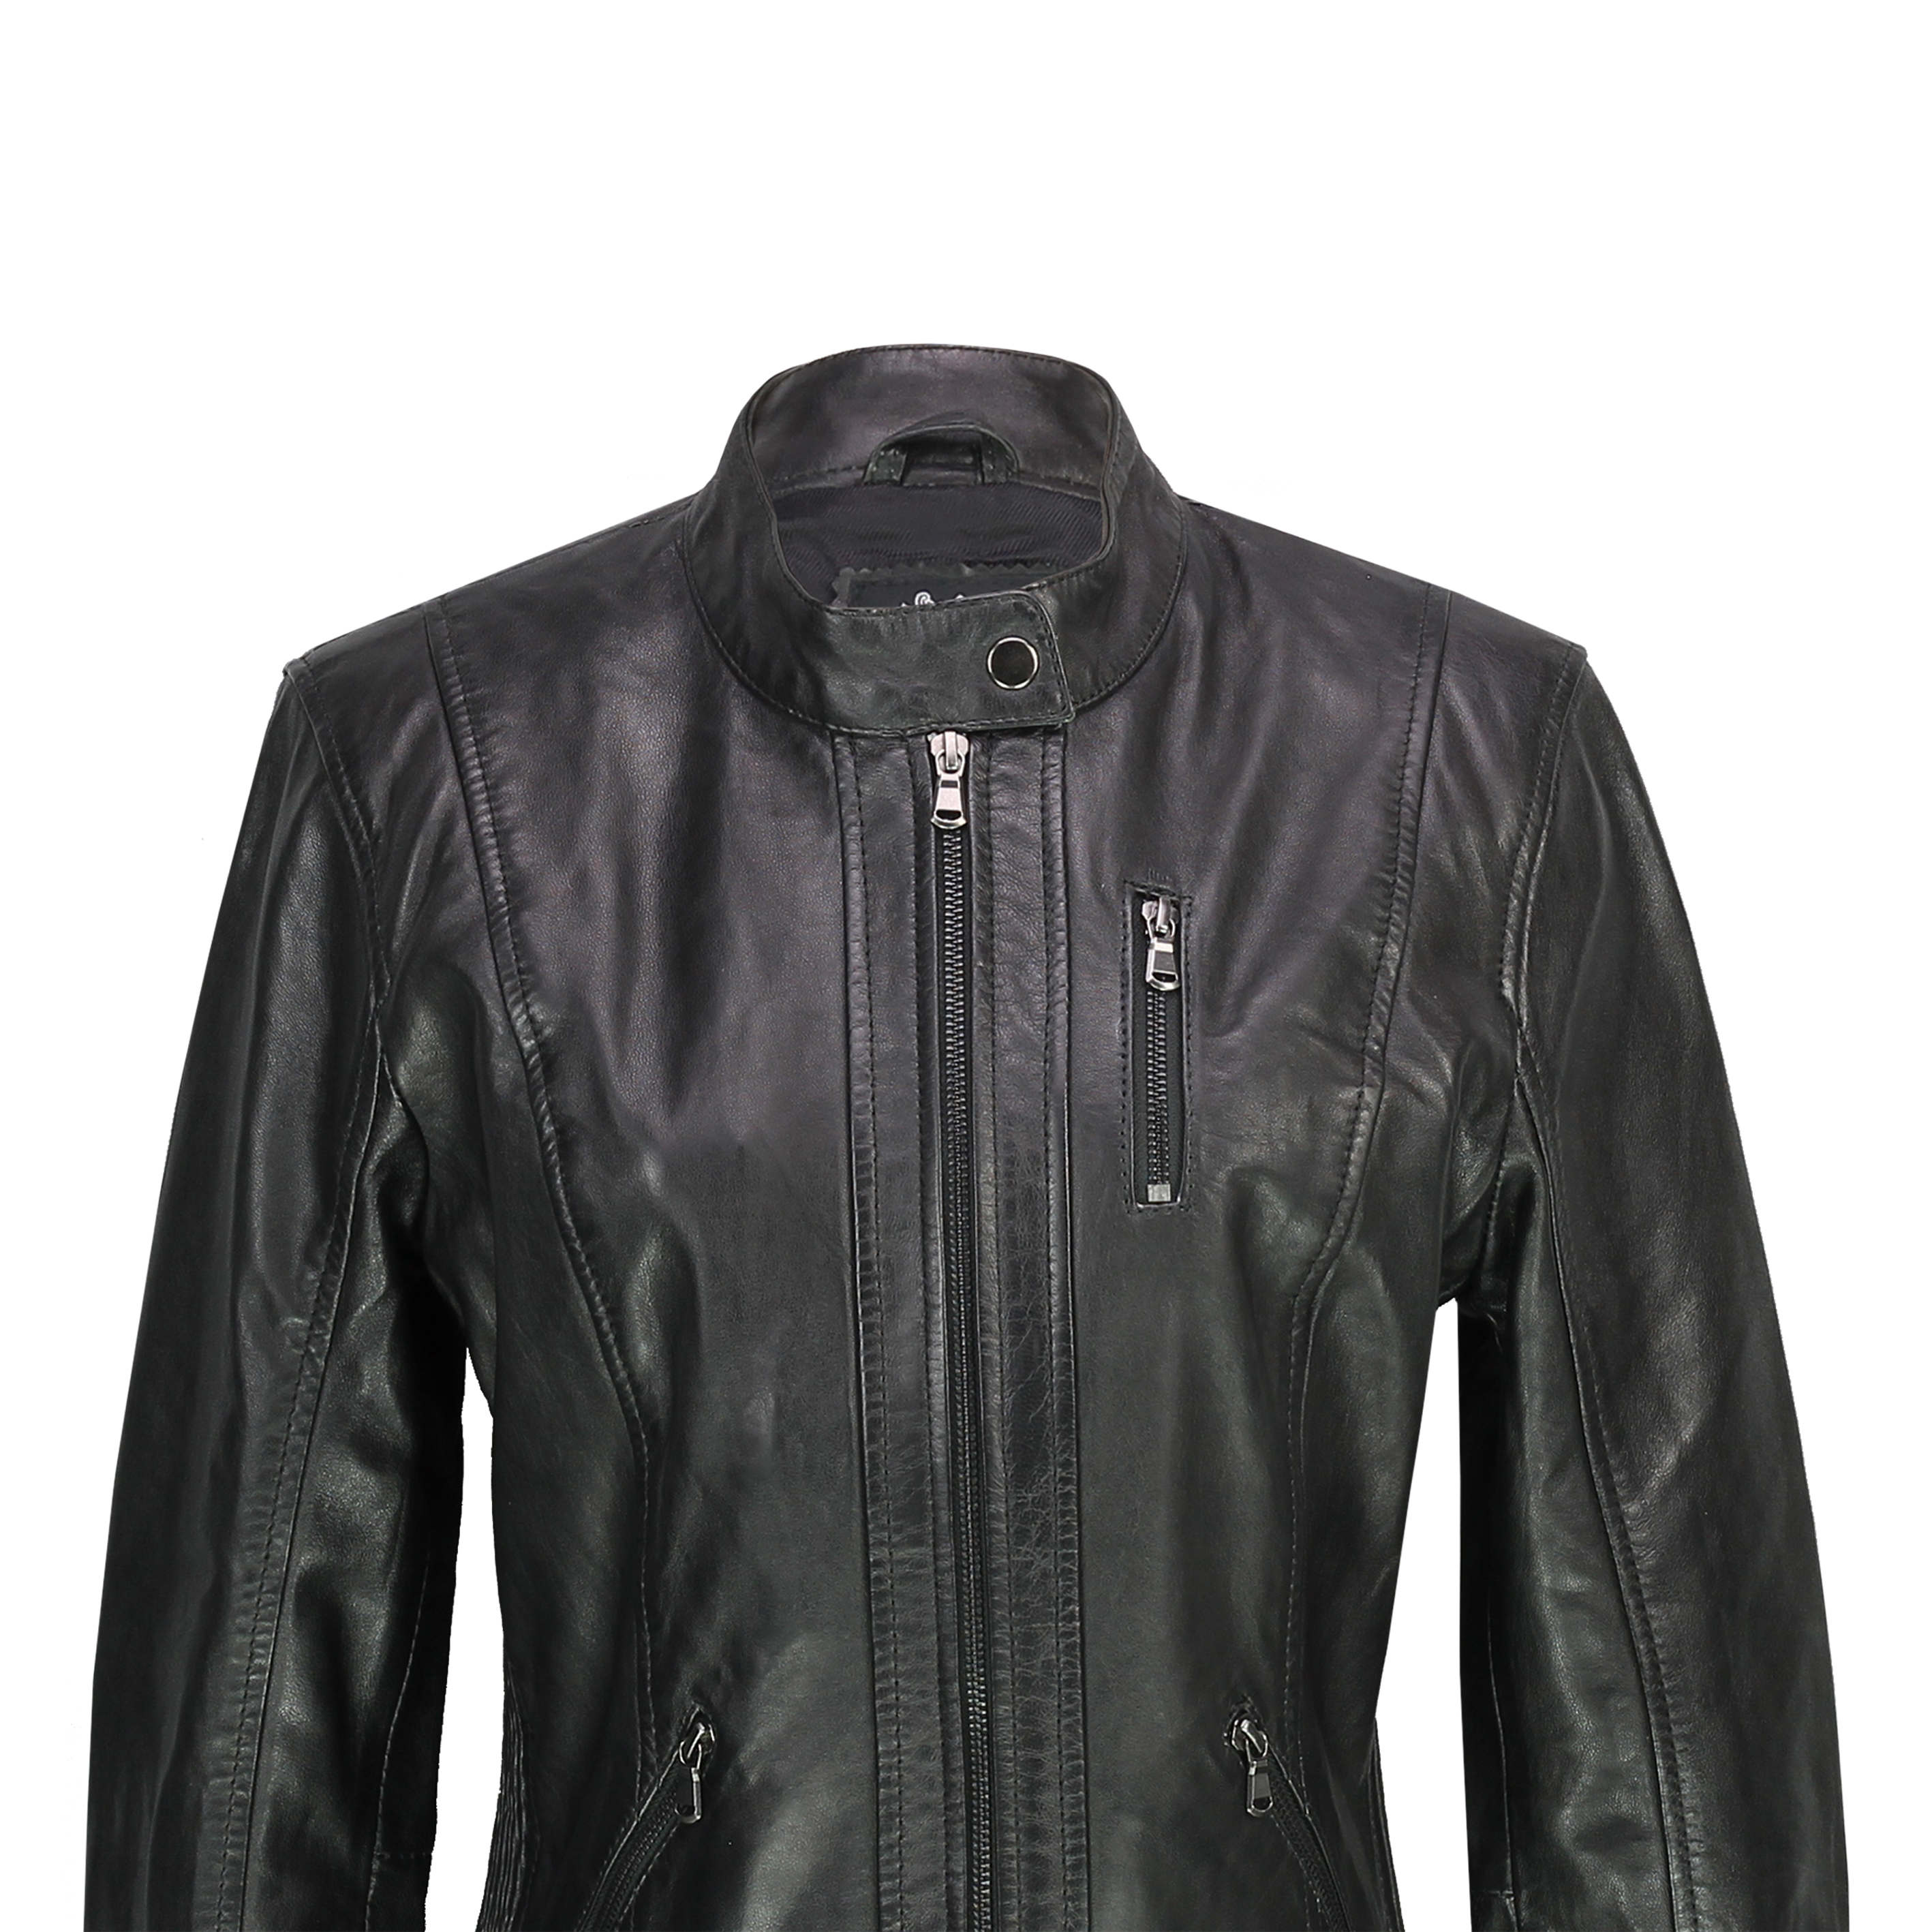 WOMENS VINTAGE REAL LEATHER JACKET